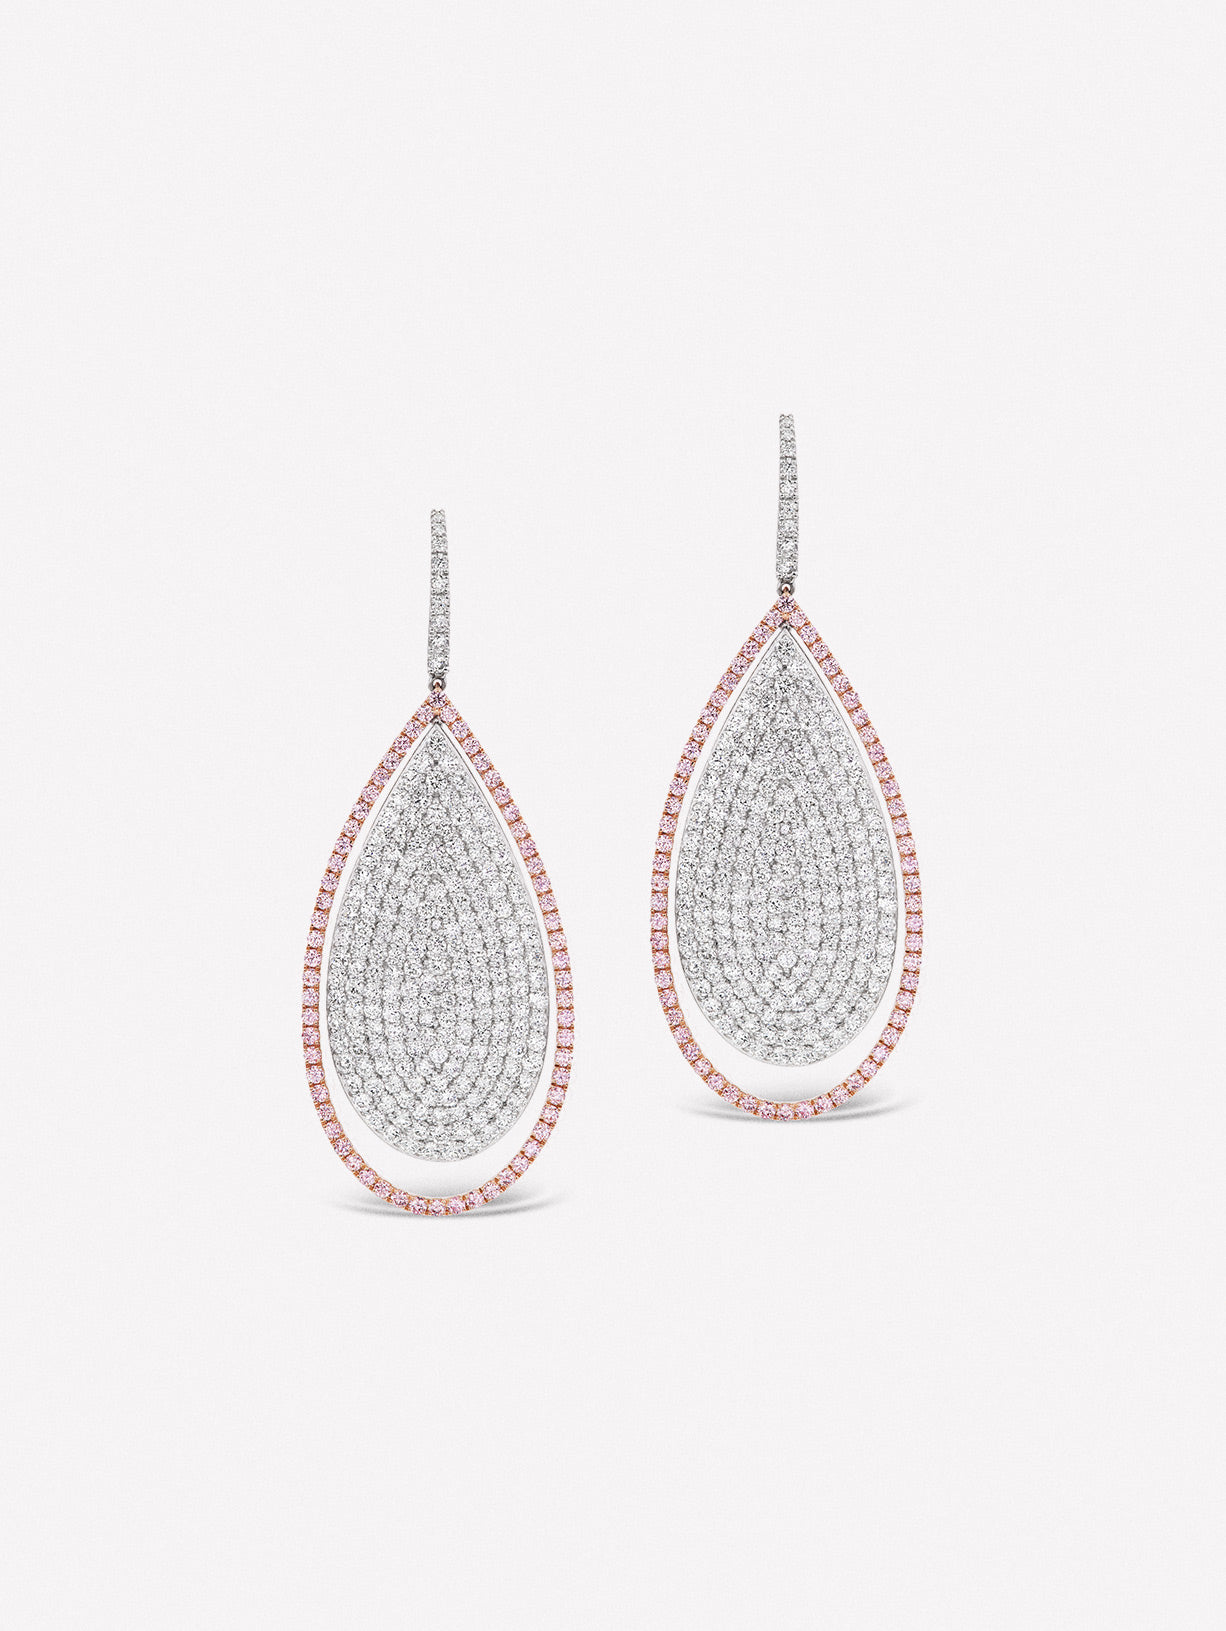 Large pink and white diamond drop earrings